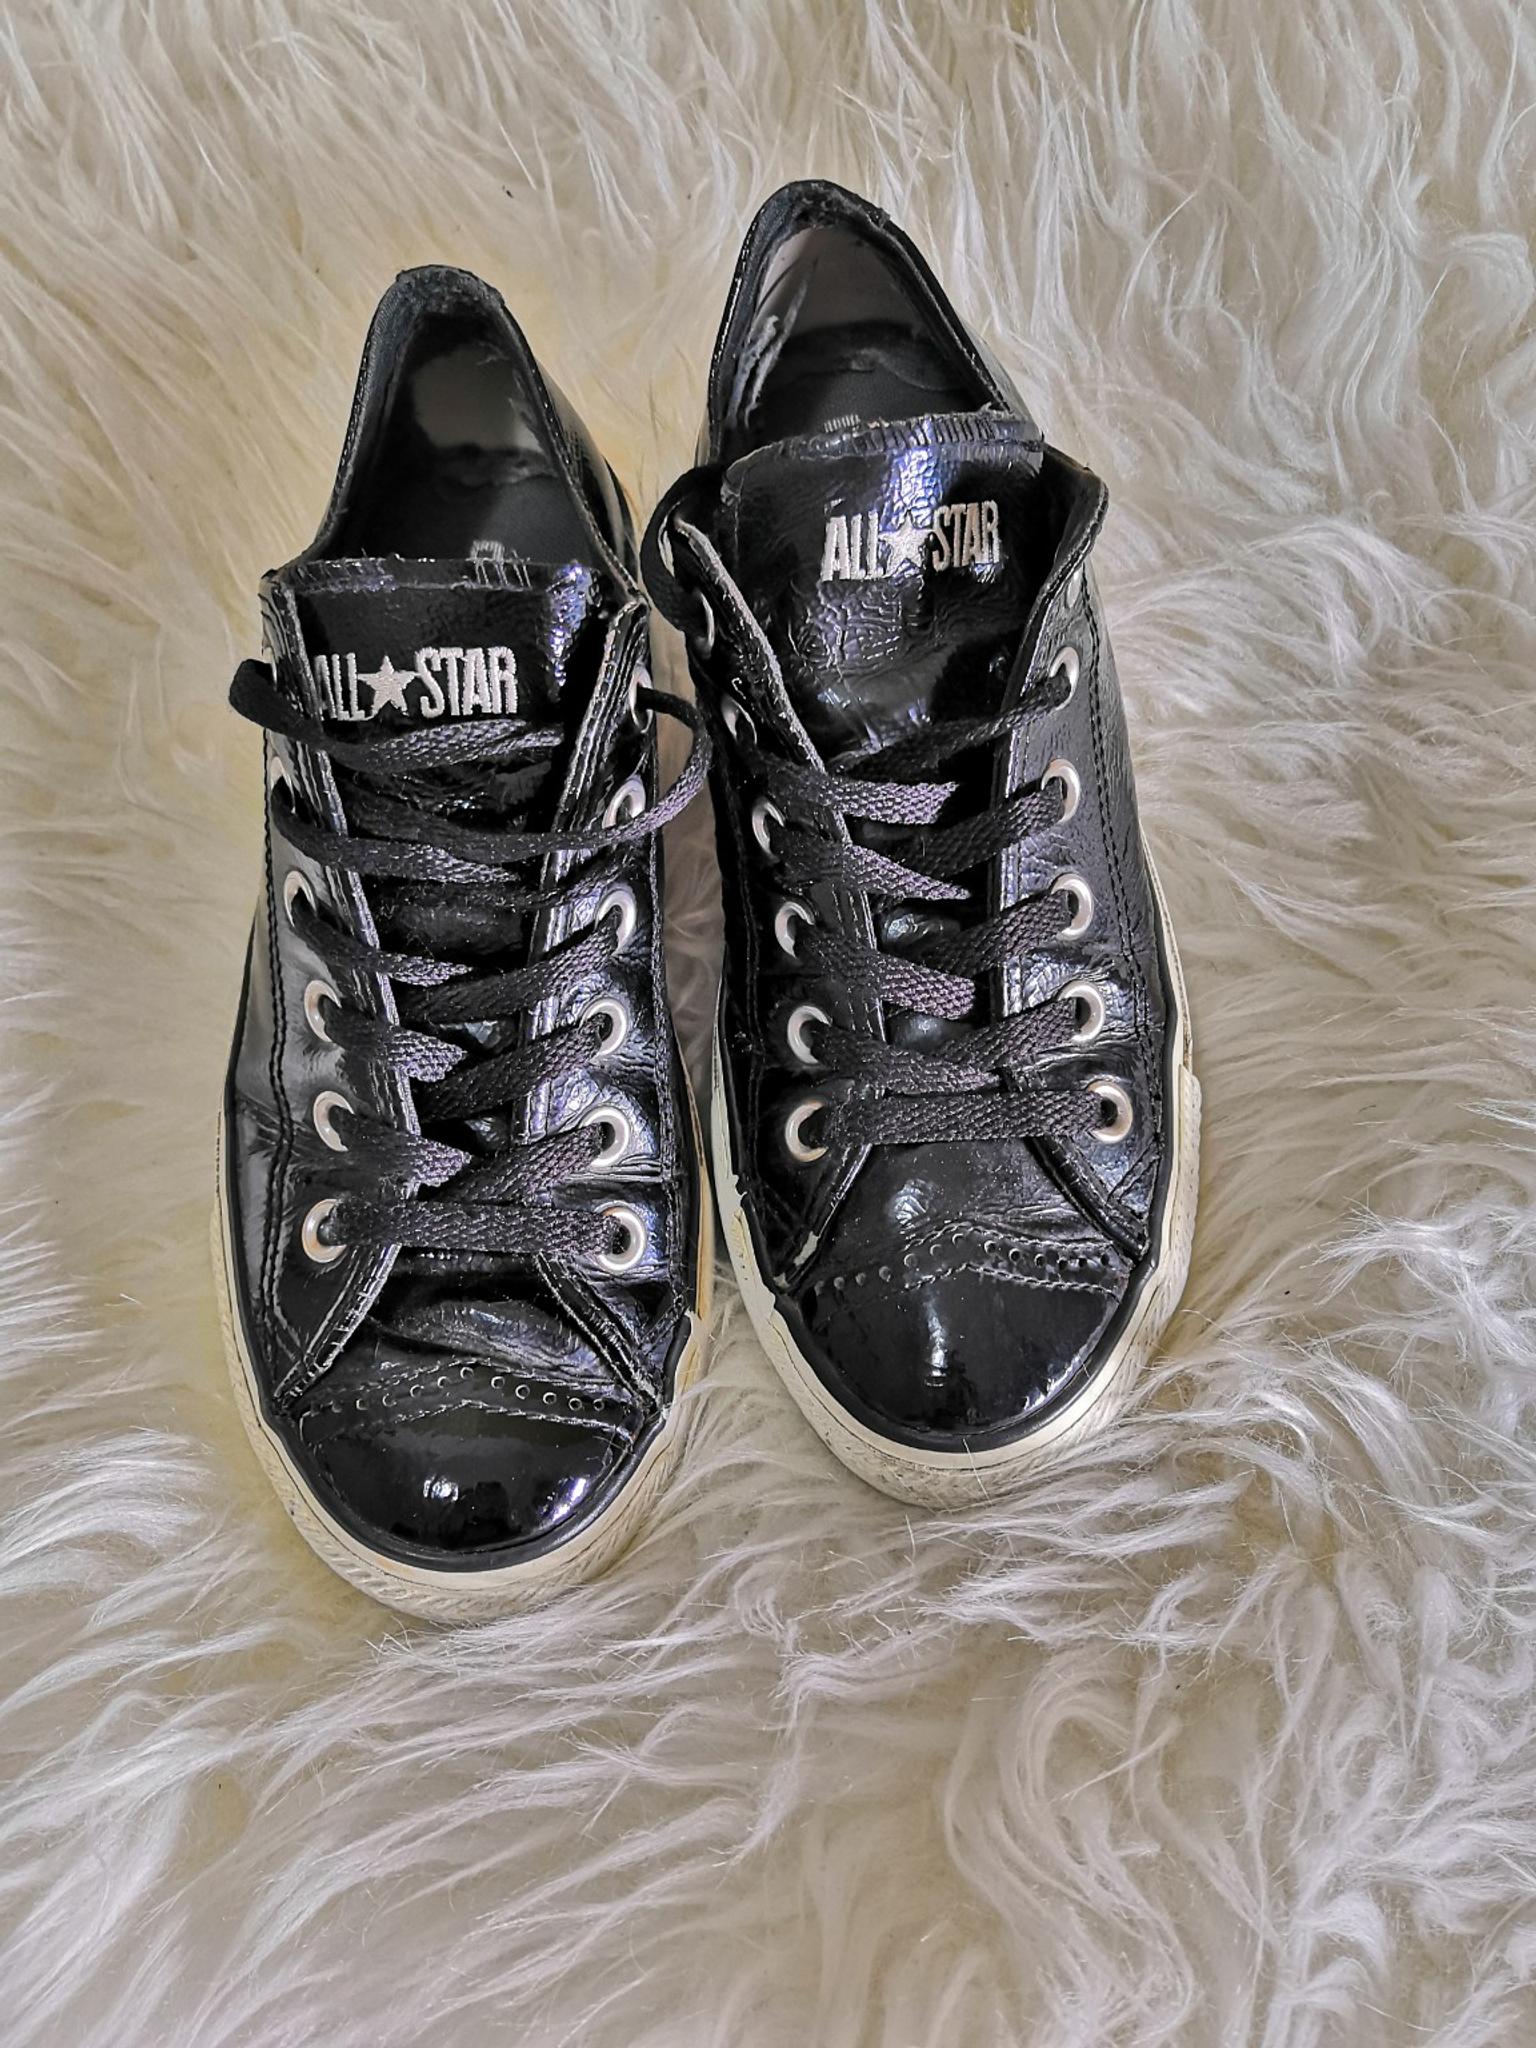 Converse 37.5 in Roma Roma for €25.00 for sale | Shpock